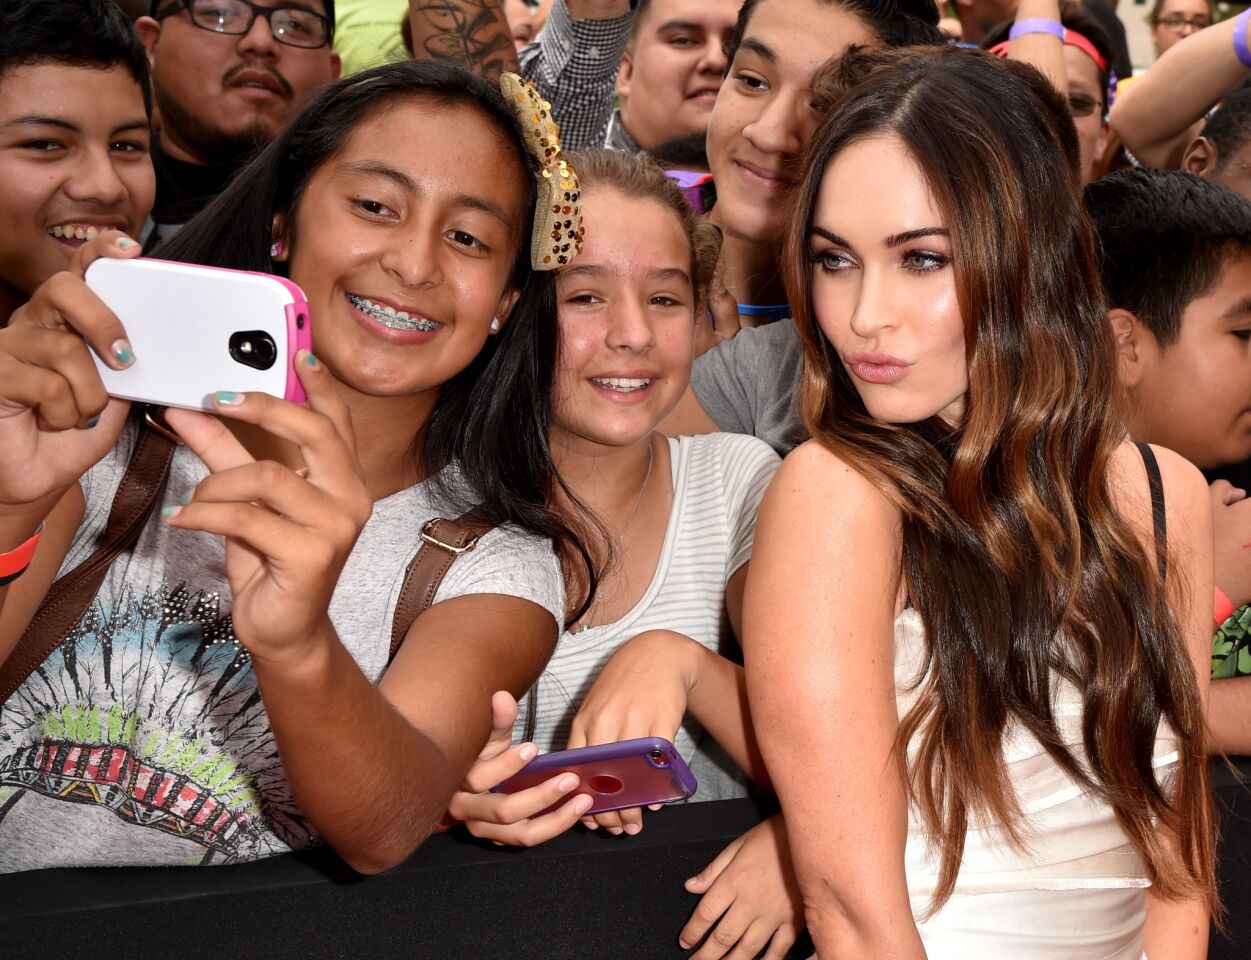 Actress Megan Fox, right, joins a selfie with fans at the premiere of Paramount Pictures' "Teenage Mutant Ninja Turtles" at Regency Village Theater in Westwood on Aug. 3